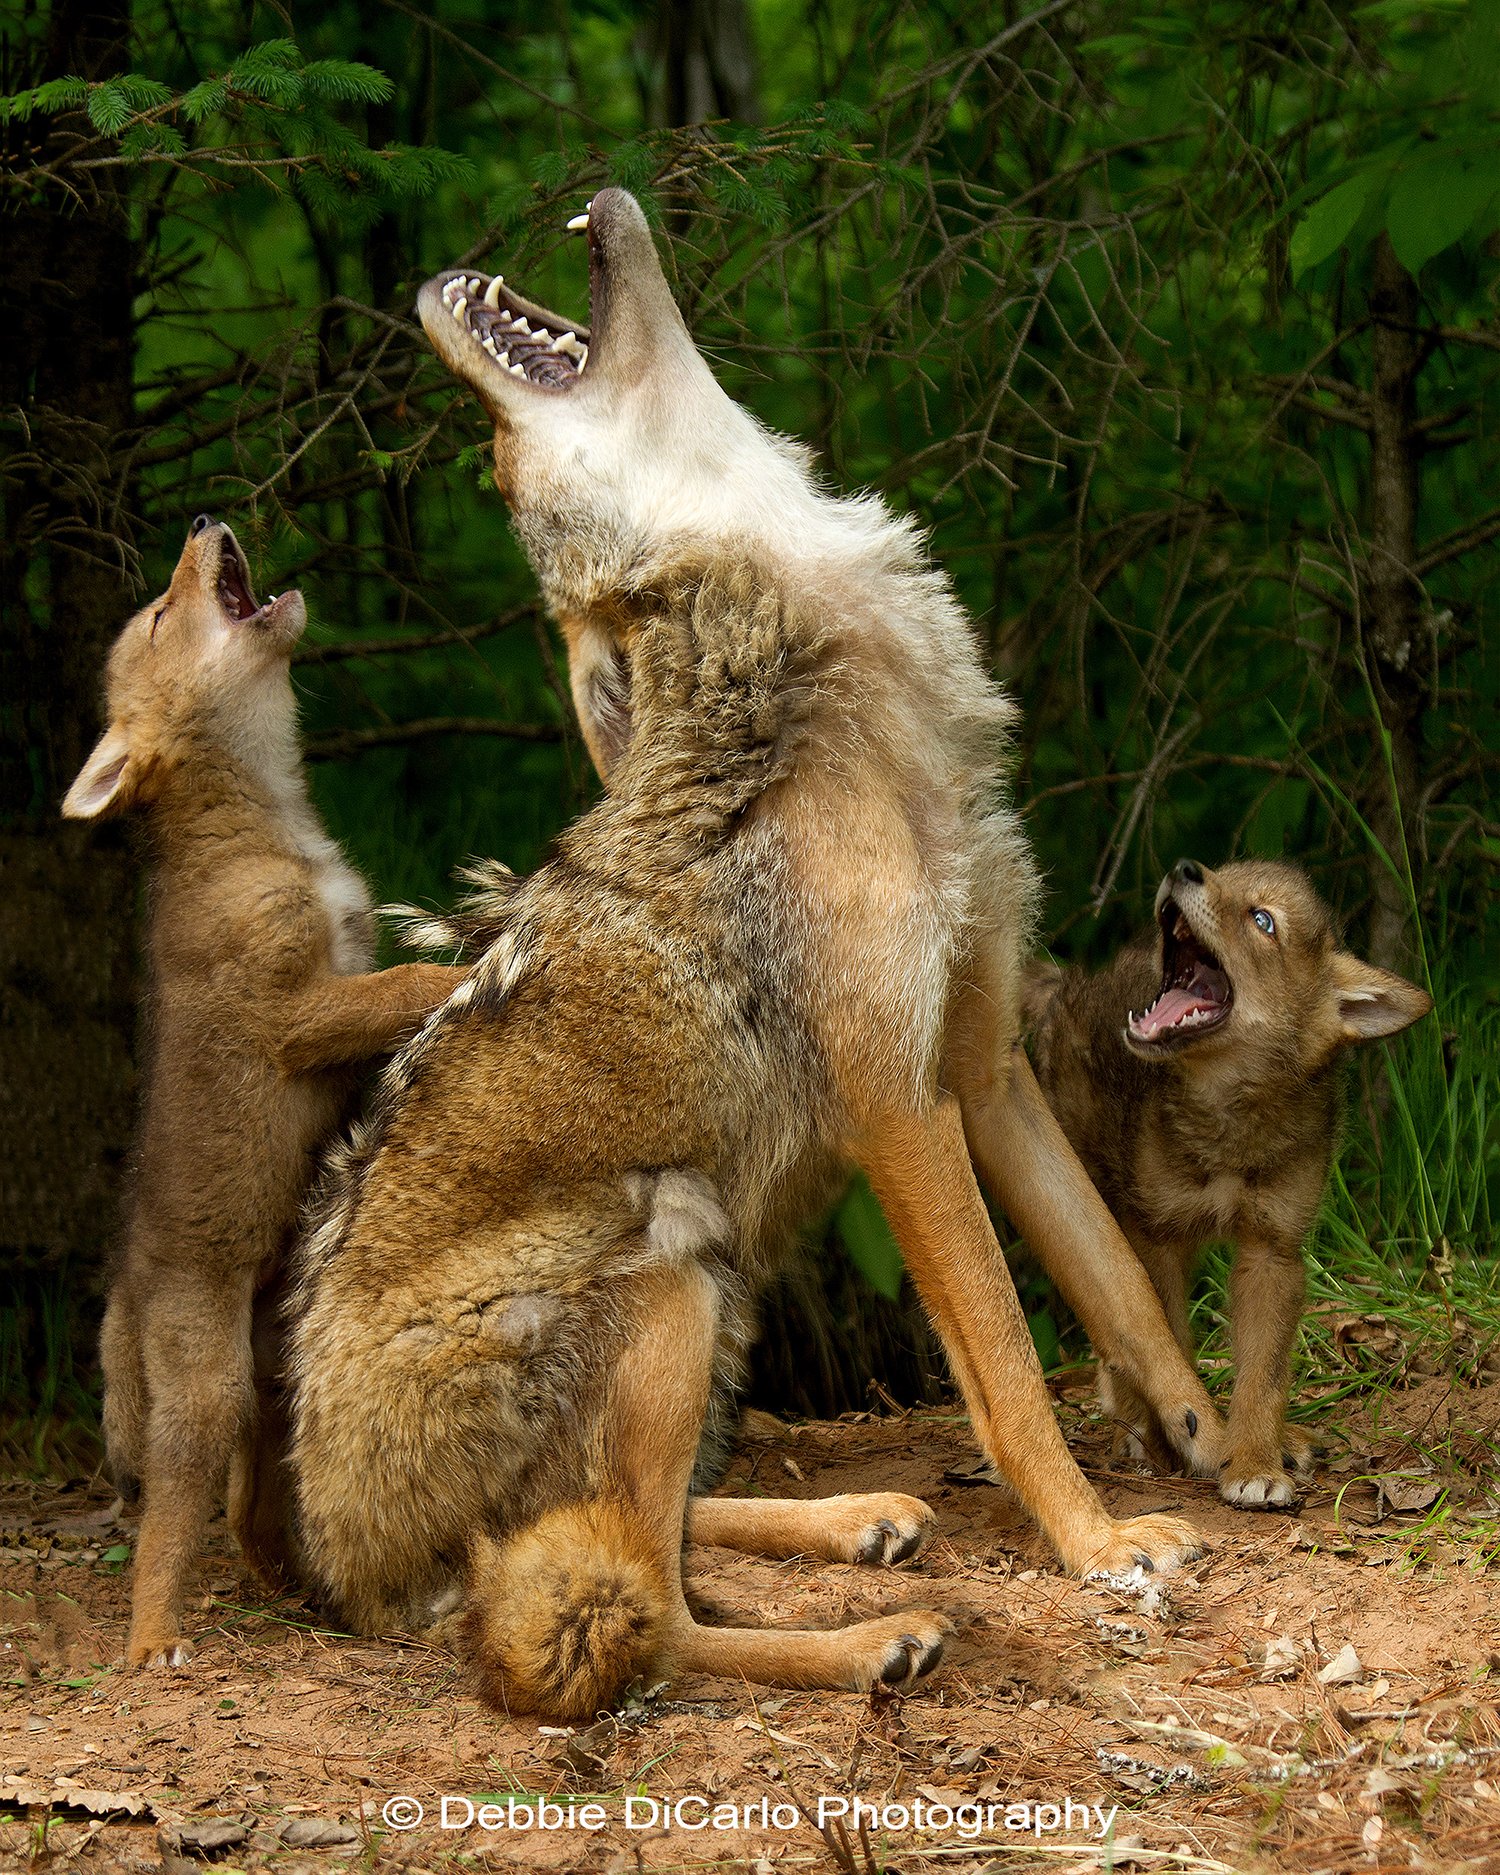 How I Made It: The Story Behind Debbie DiCarlo’s “Howling Lesson” Photo